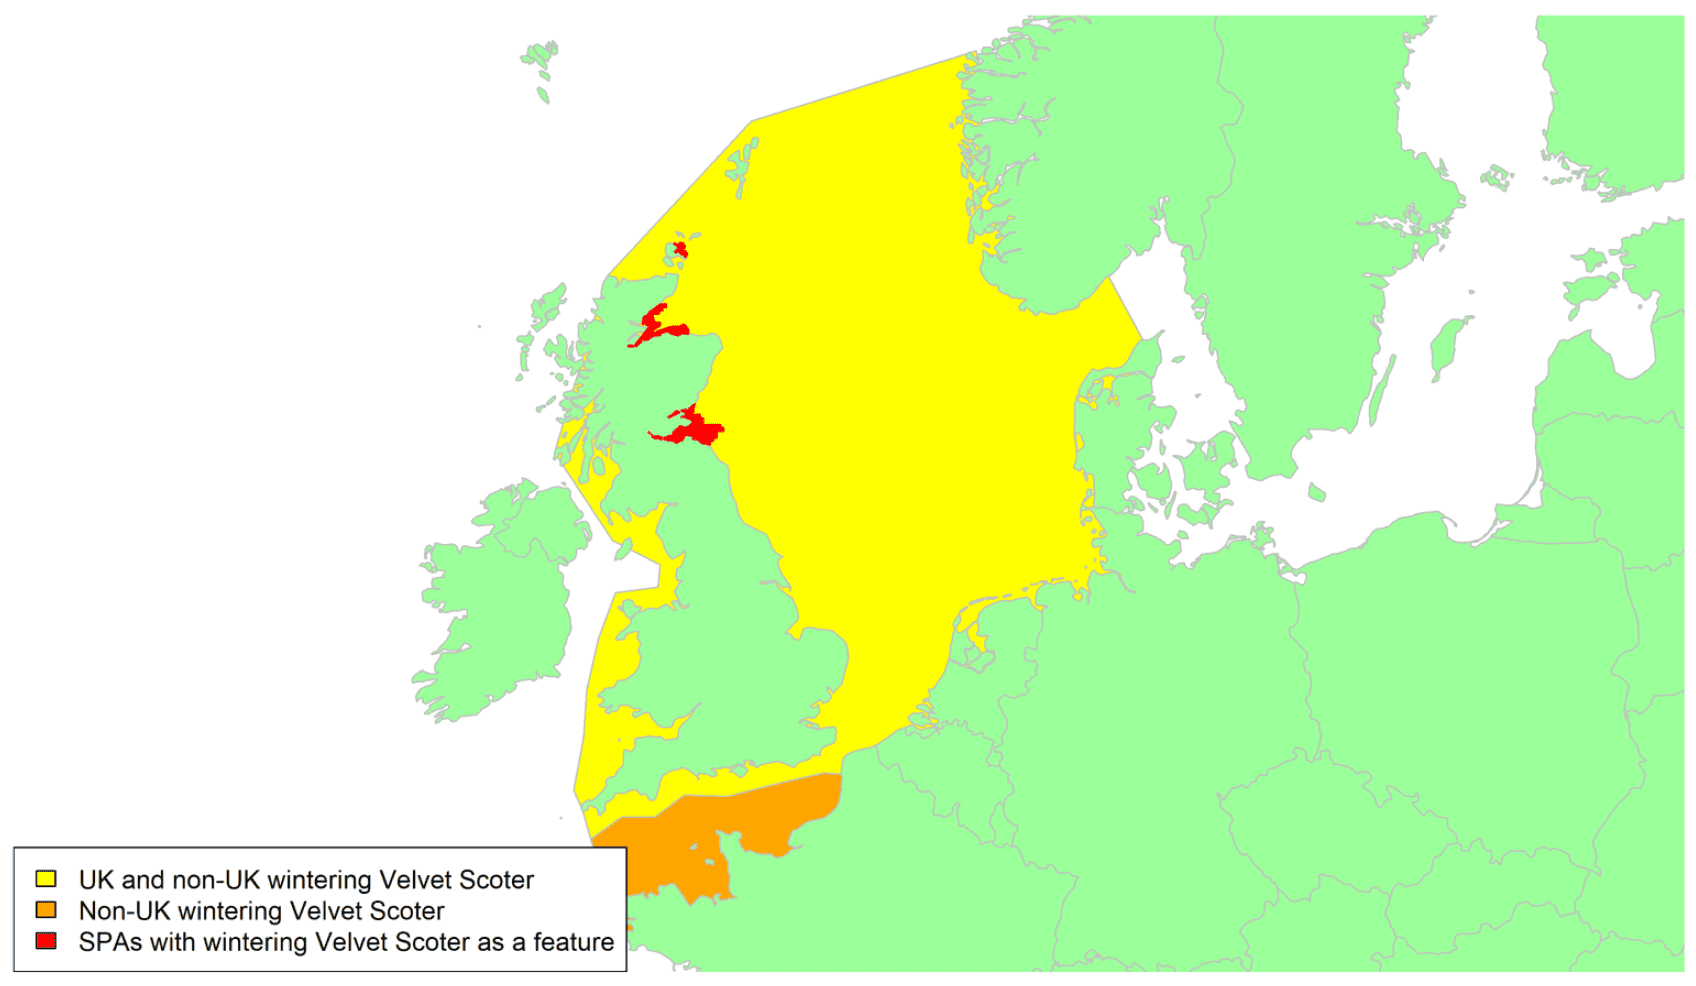 Map of North West Europe showing migratory routes and SPAs within the UK for Velvet Scoter as described in the text below.